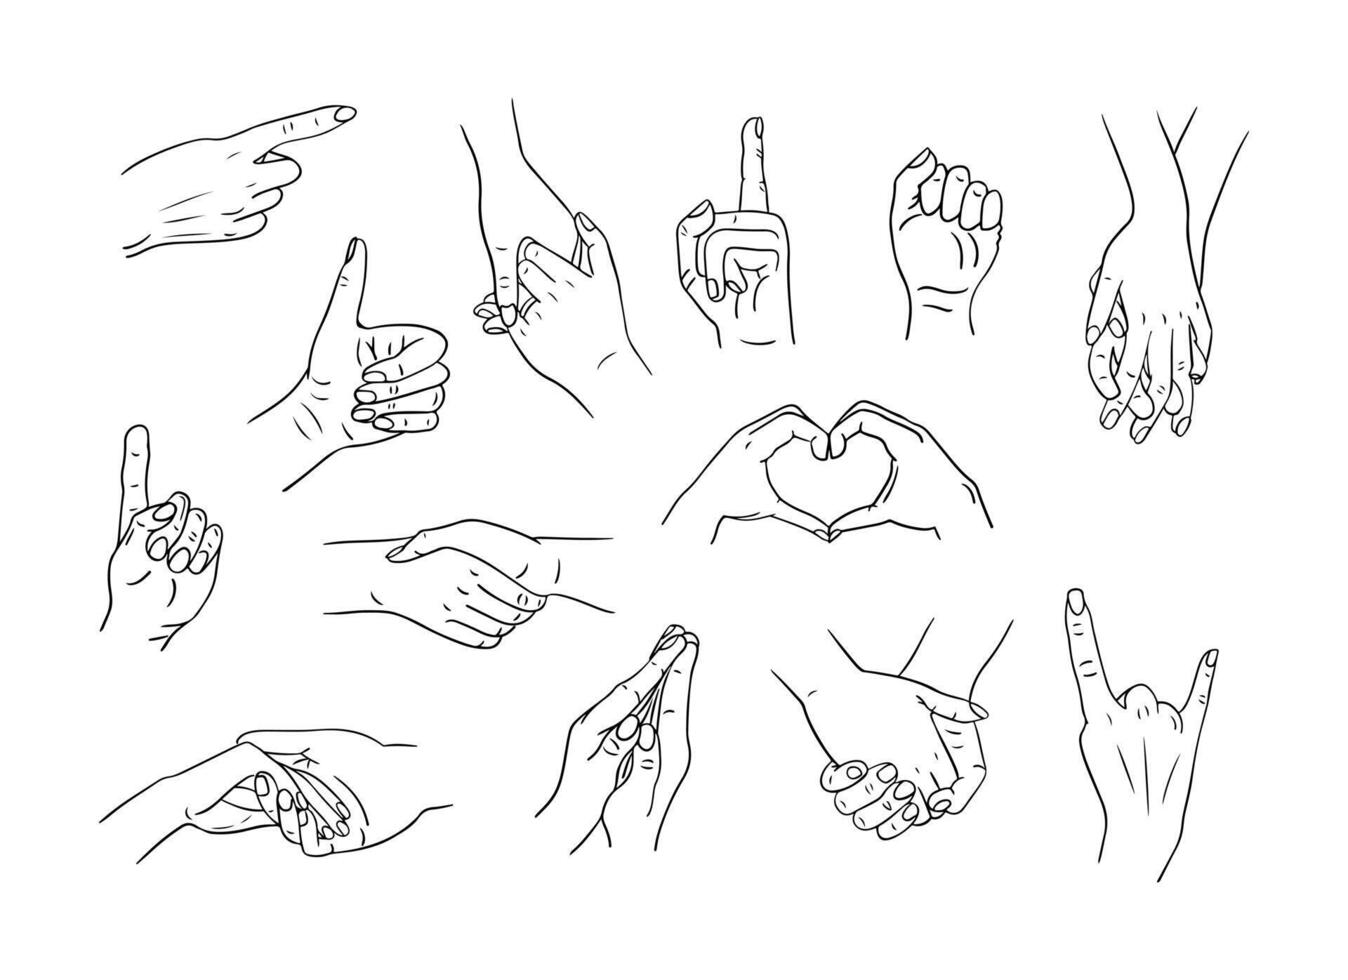 Sketchy drawings oh different poses of human hands. Males and females hands of people in relationship or single. Ideal for coloring pages, tattoo, pattern vector